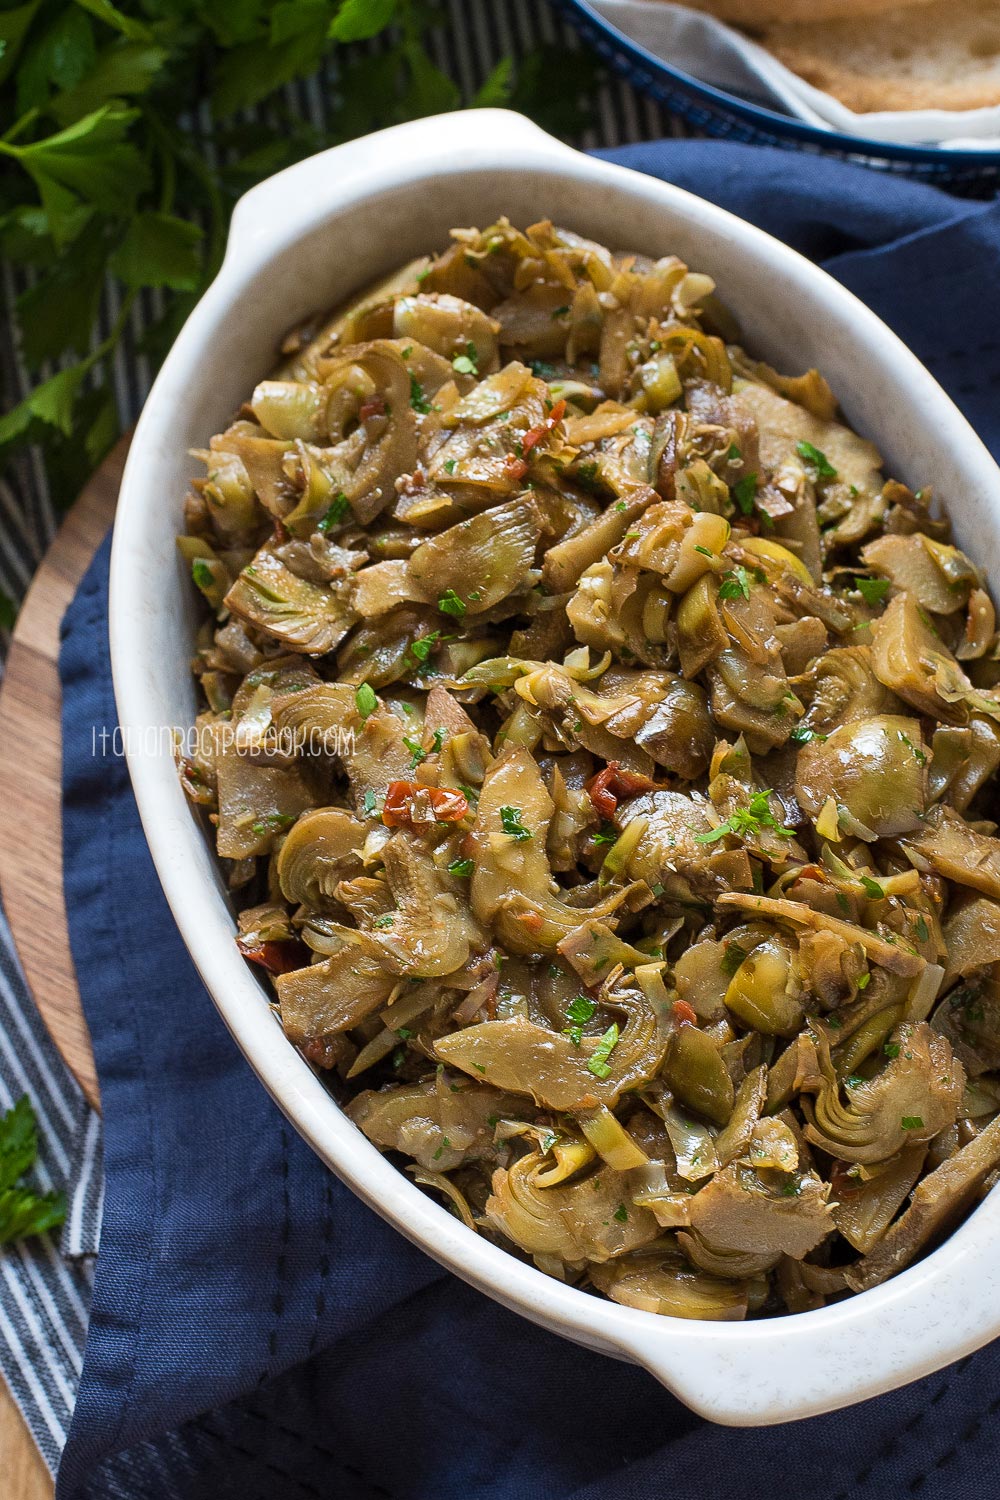 braised artichokes in a serving dish